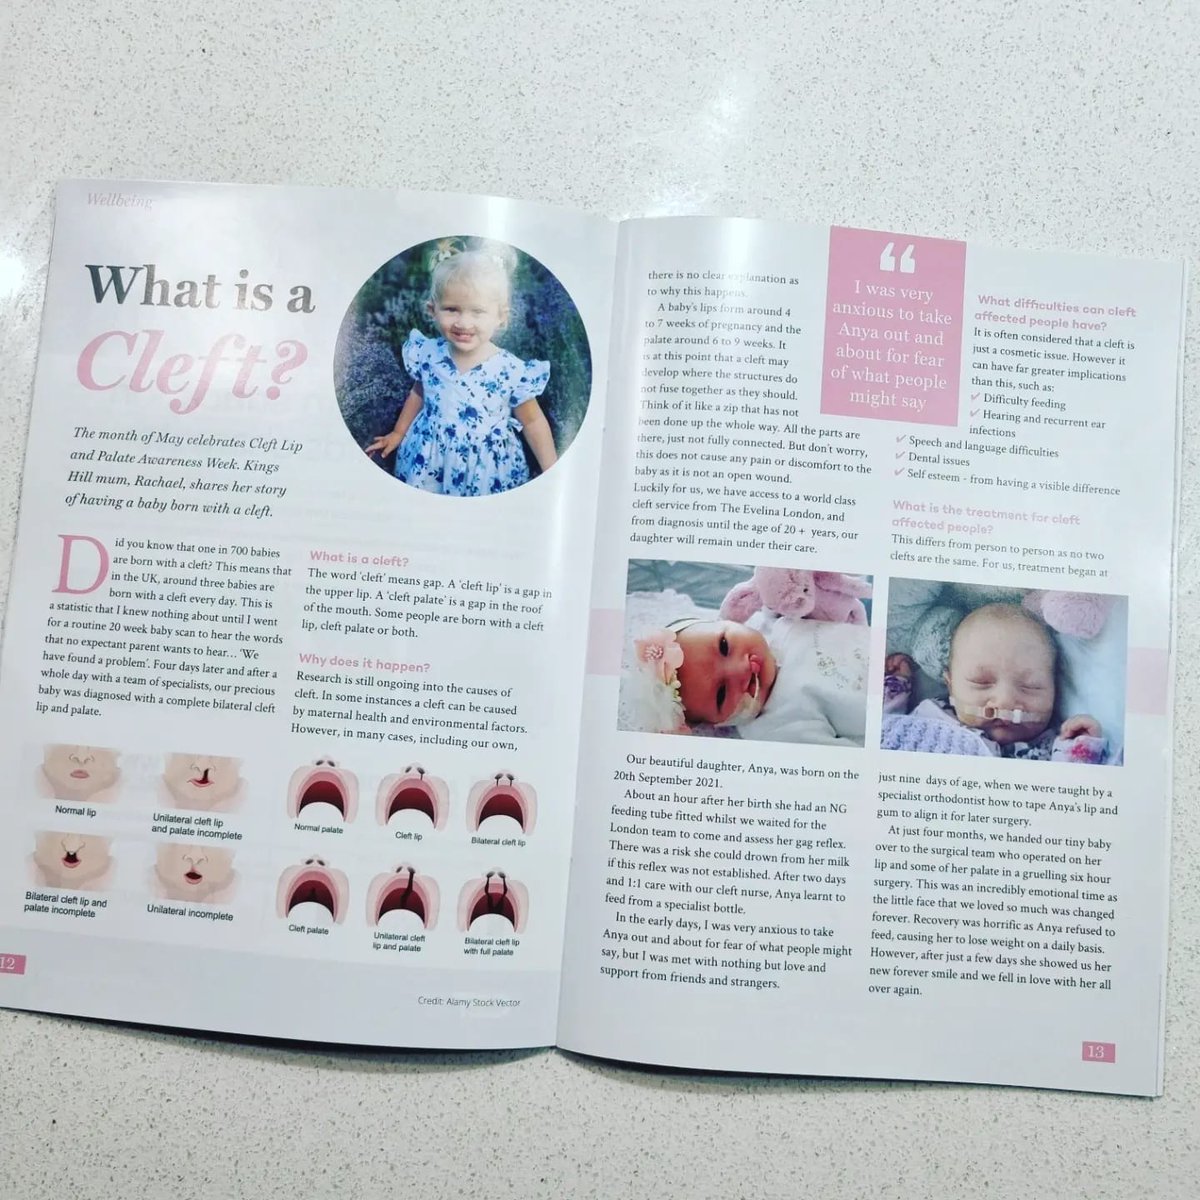 For #cleftawarenessweek, our Cleft Community Advisory Council member, Rachael, has been raising awareness about what a cleft is and her journey as a cleft-affected parent in a local magazine!